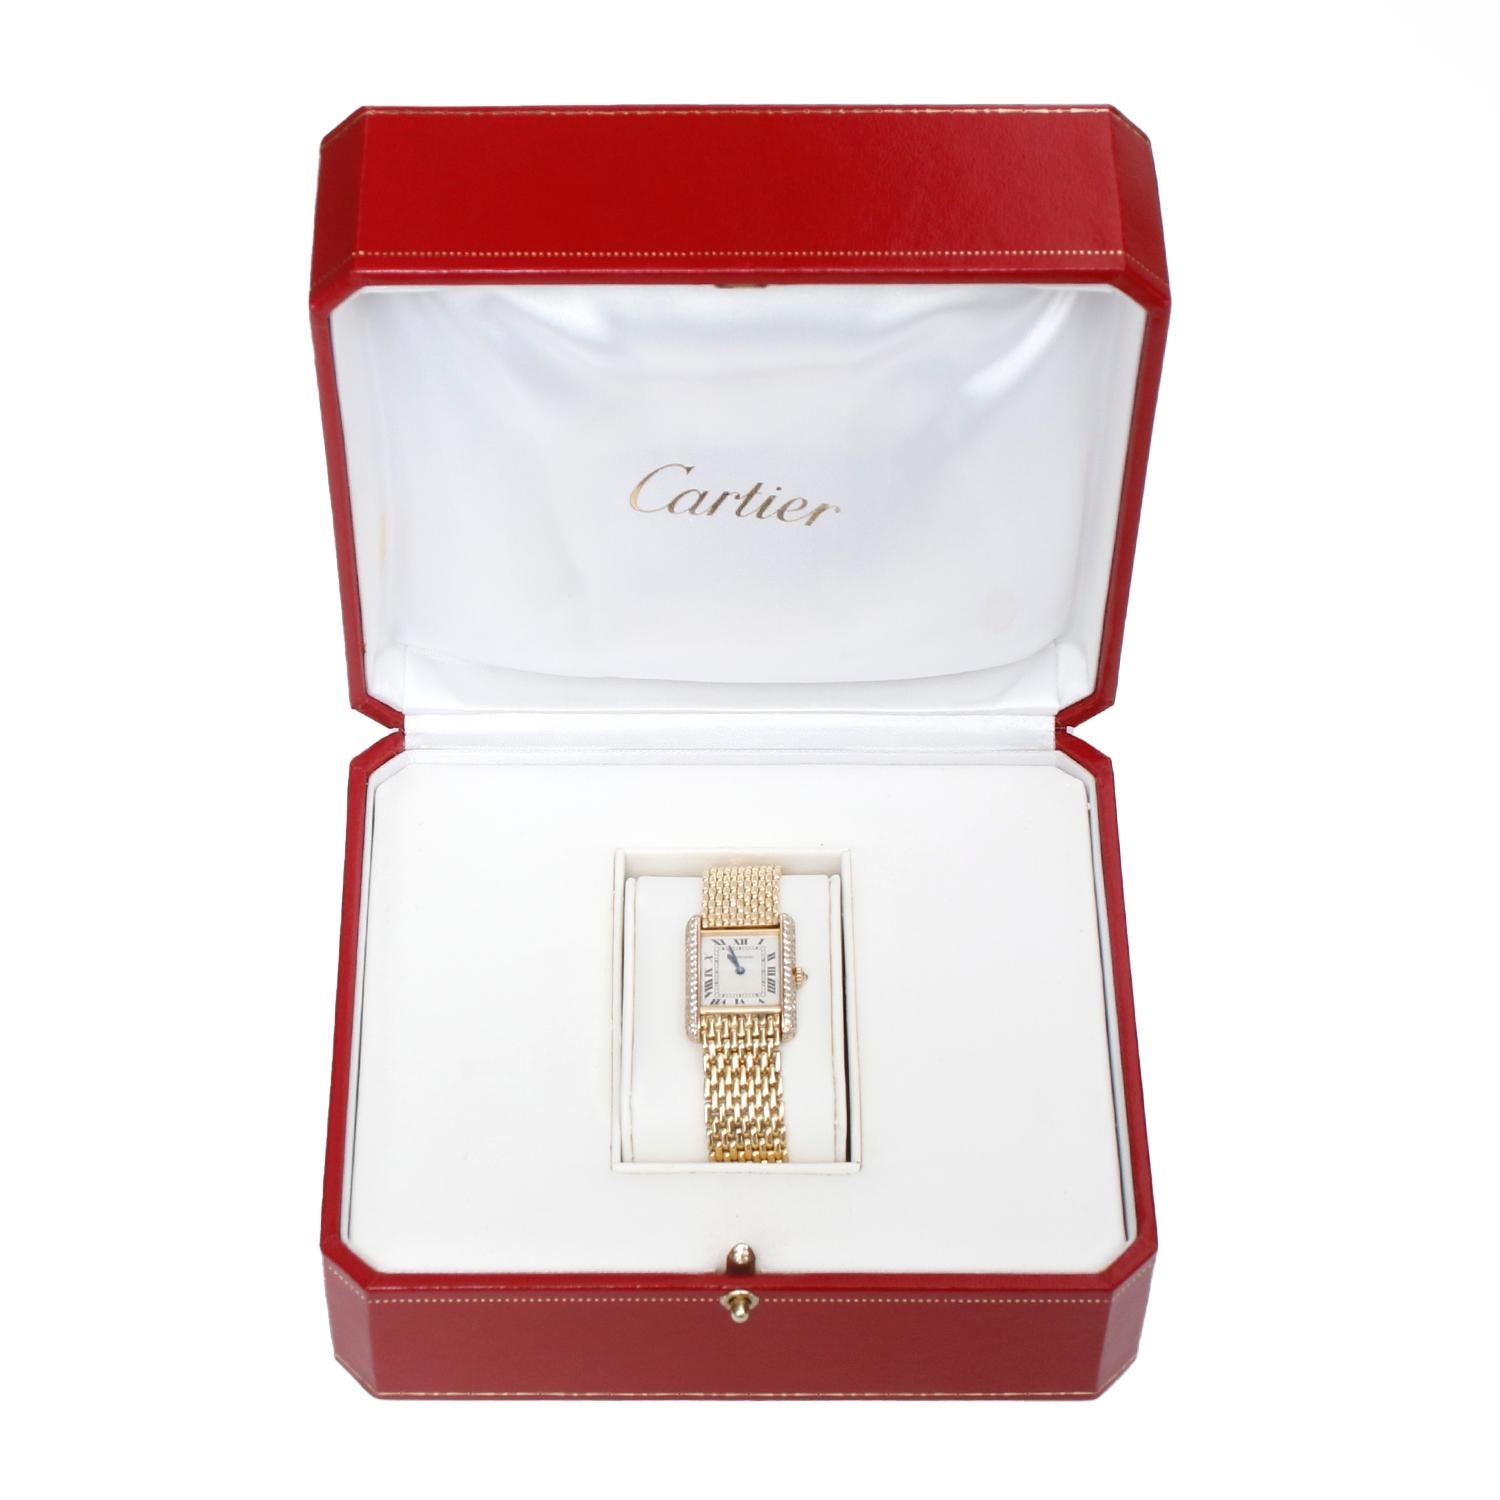 Cartier 18K Yellow Gold Tank Ladies Watch For Sale 2